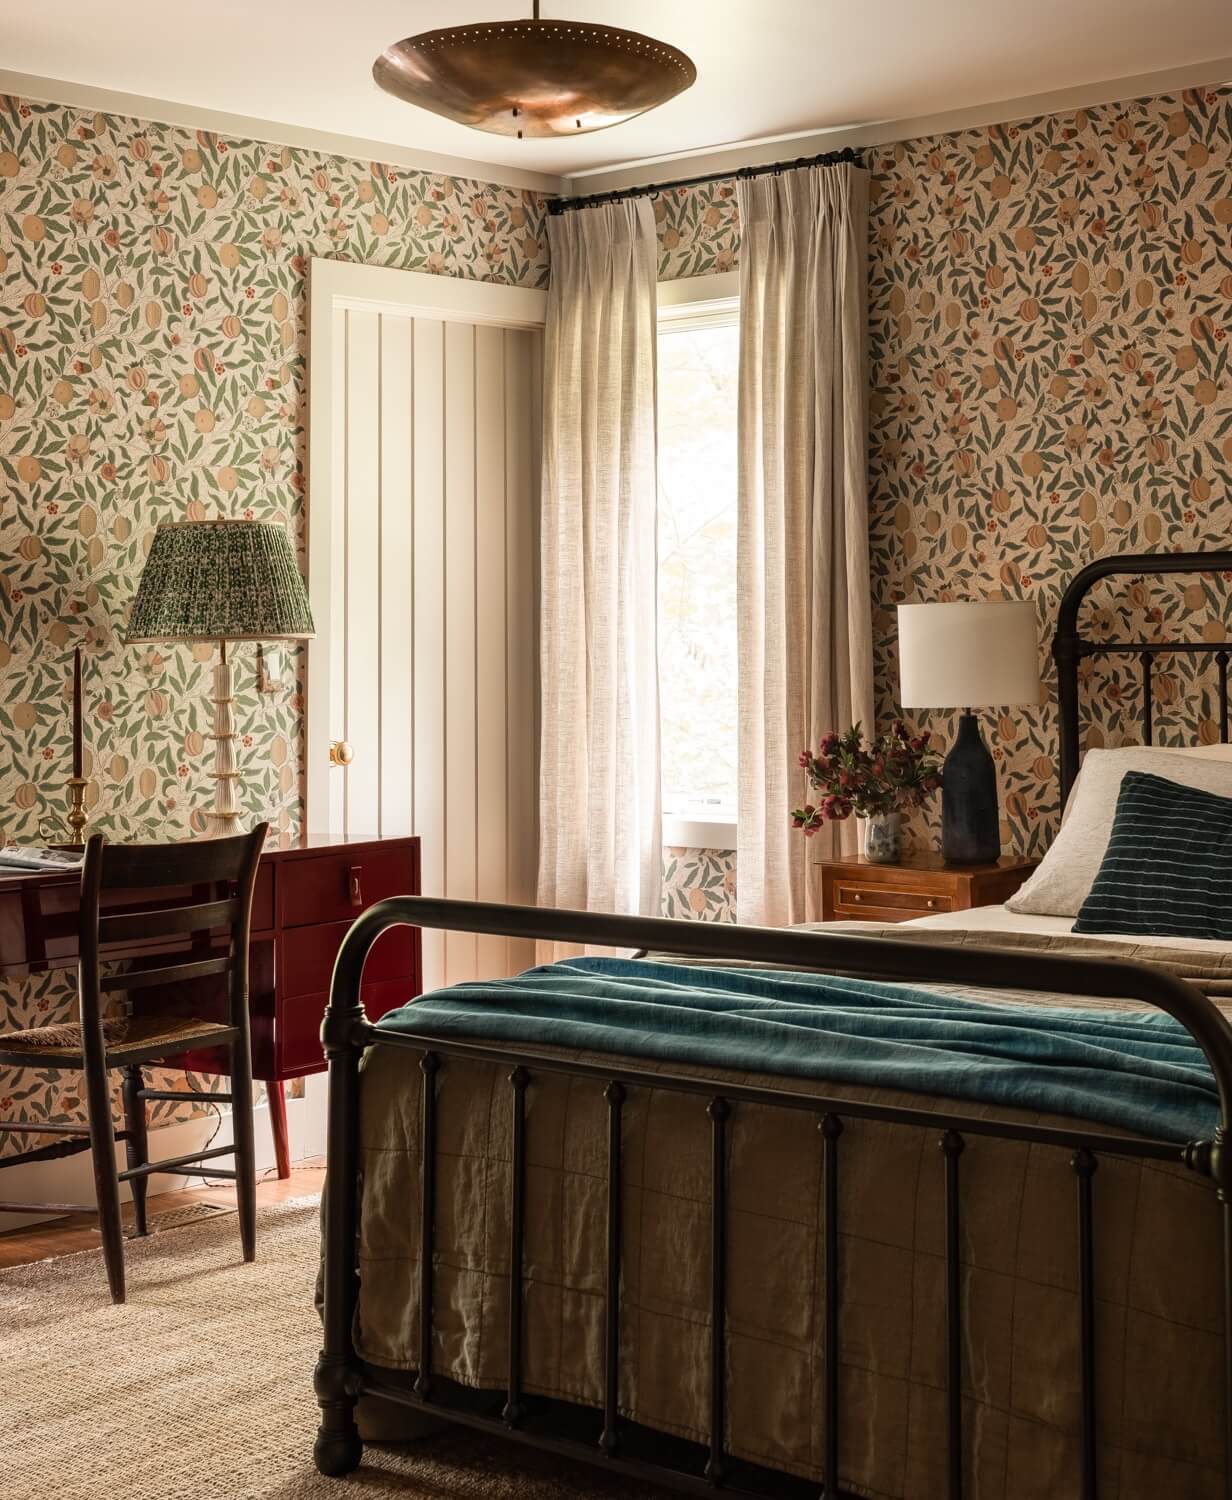 Heidi-Caillier-Design-CT-country-house-Dutchess-County-design-bedroom-william-morris-iron-bed-red-desk-Nordroom